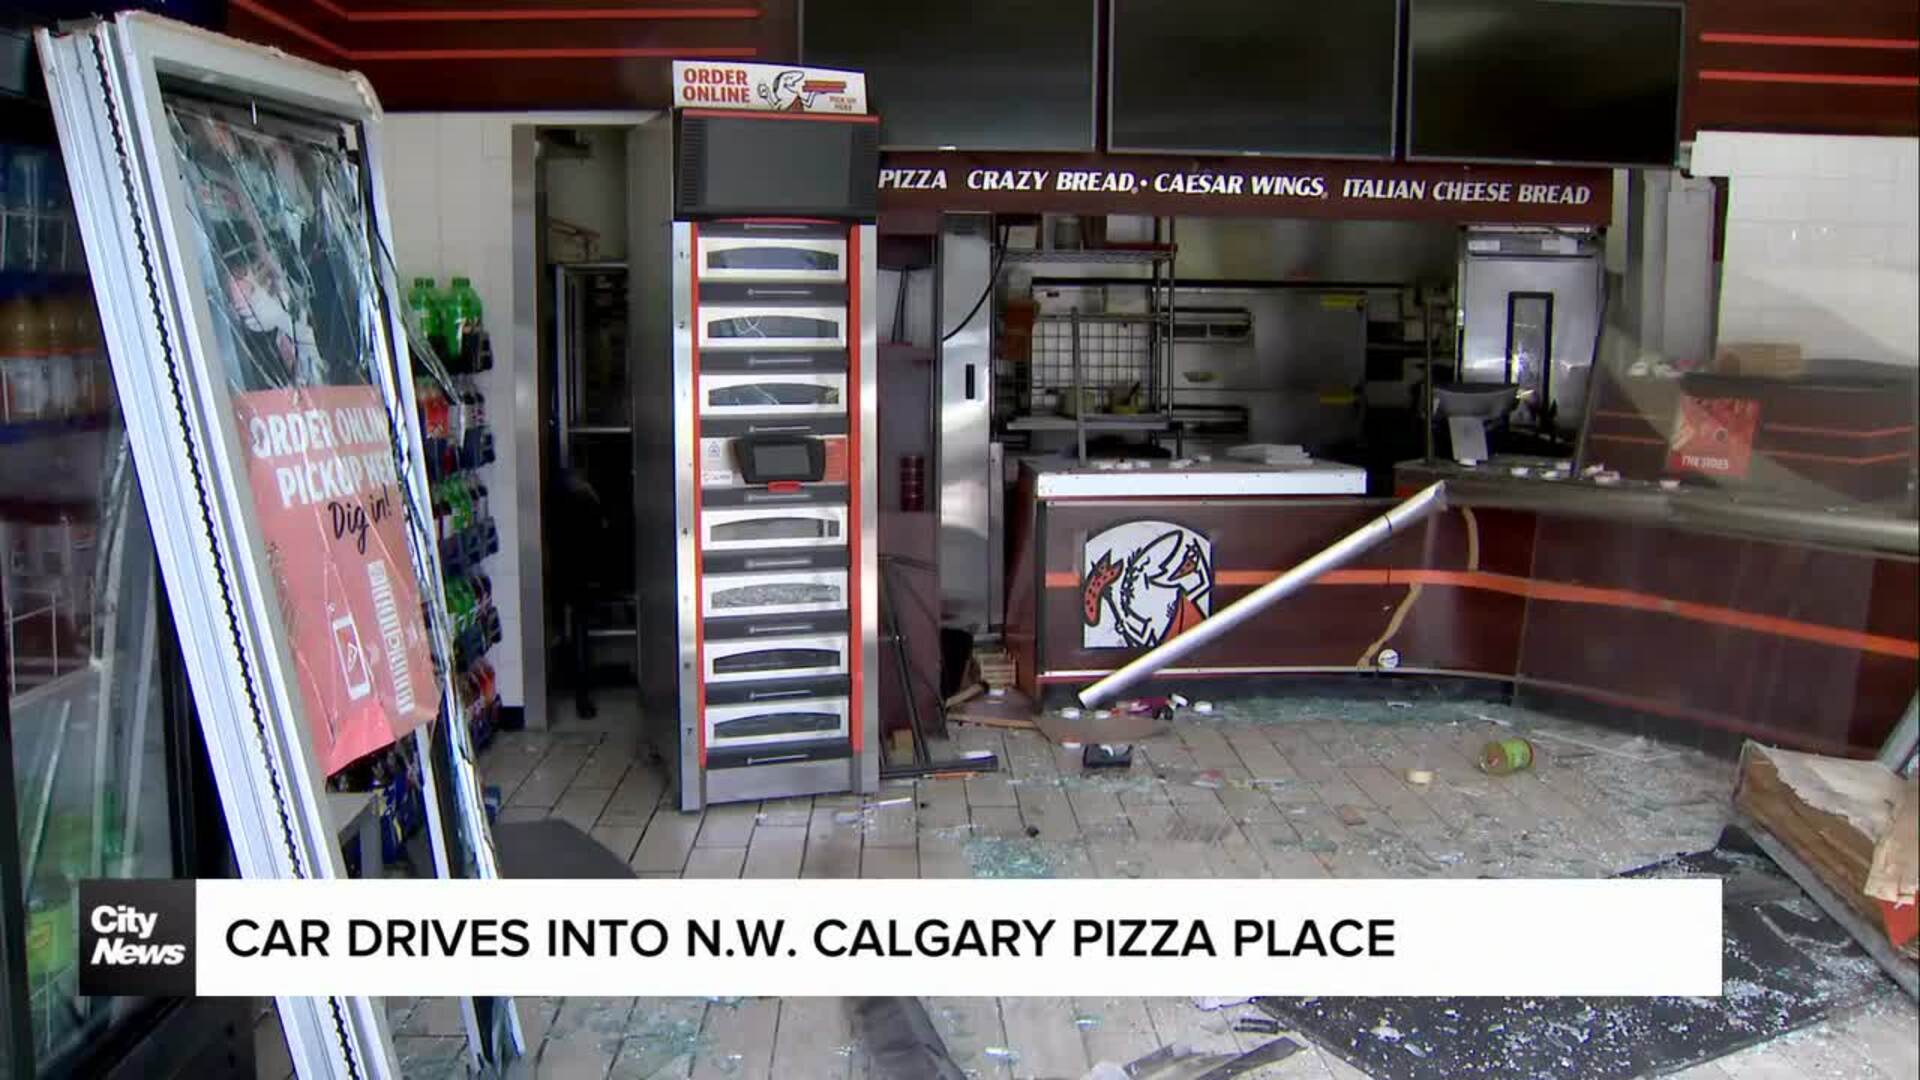 Car drives into N.W. Calgary pizza place